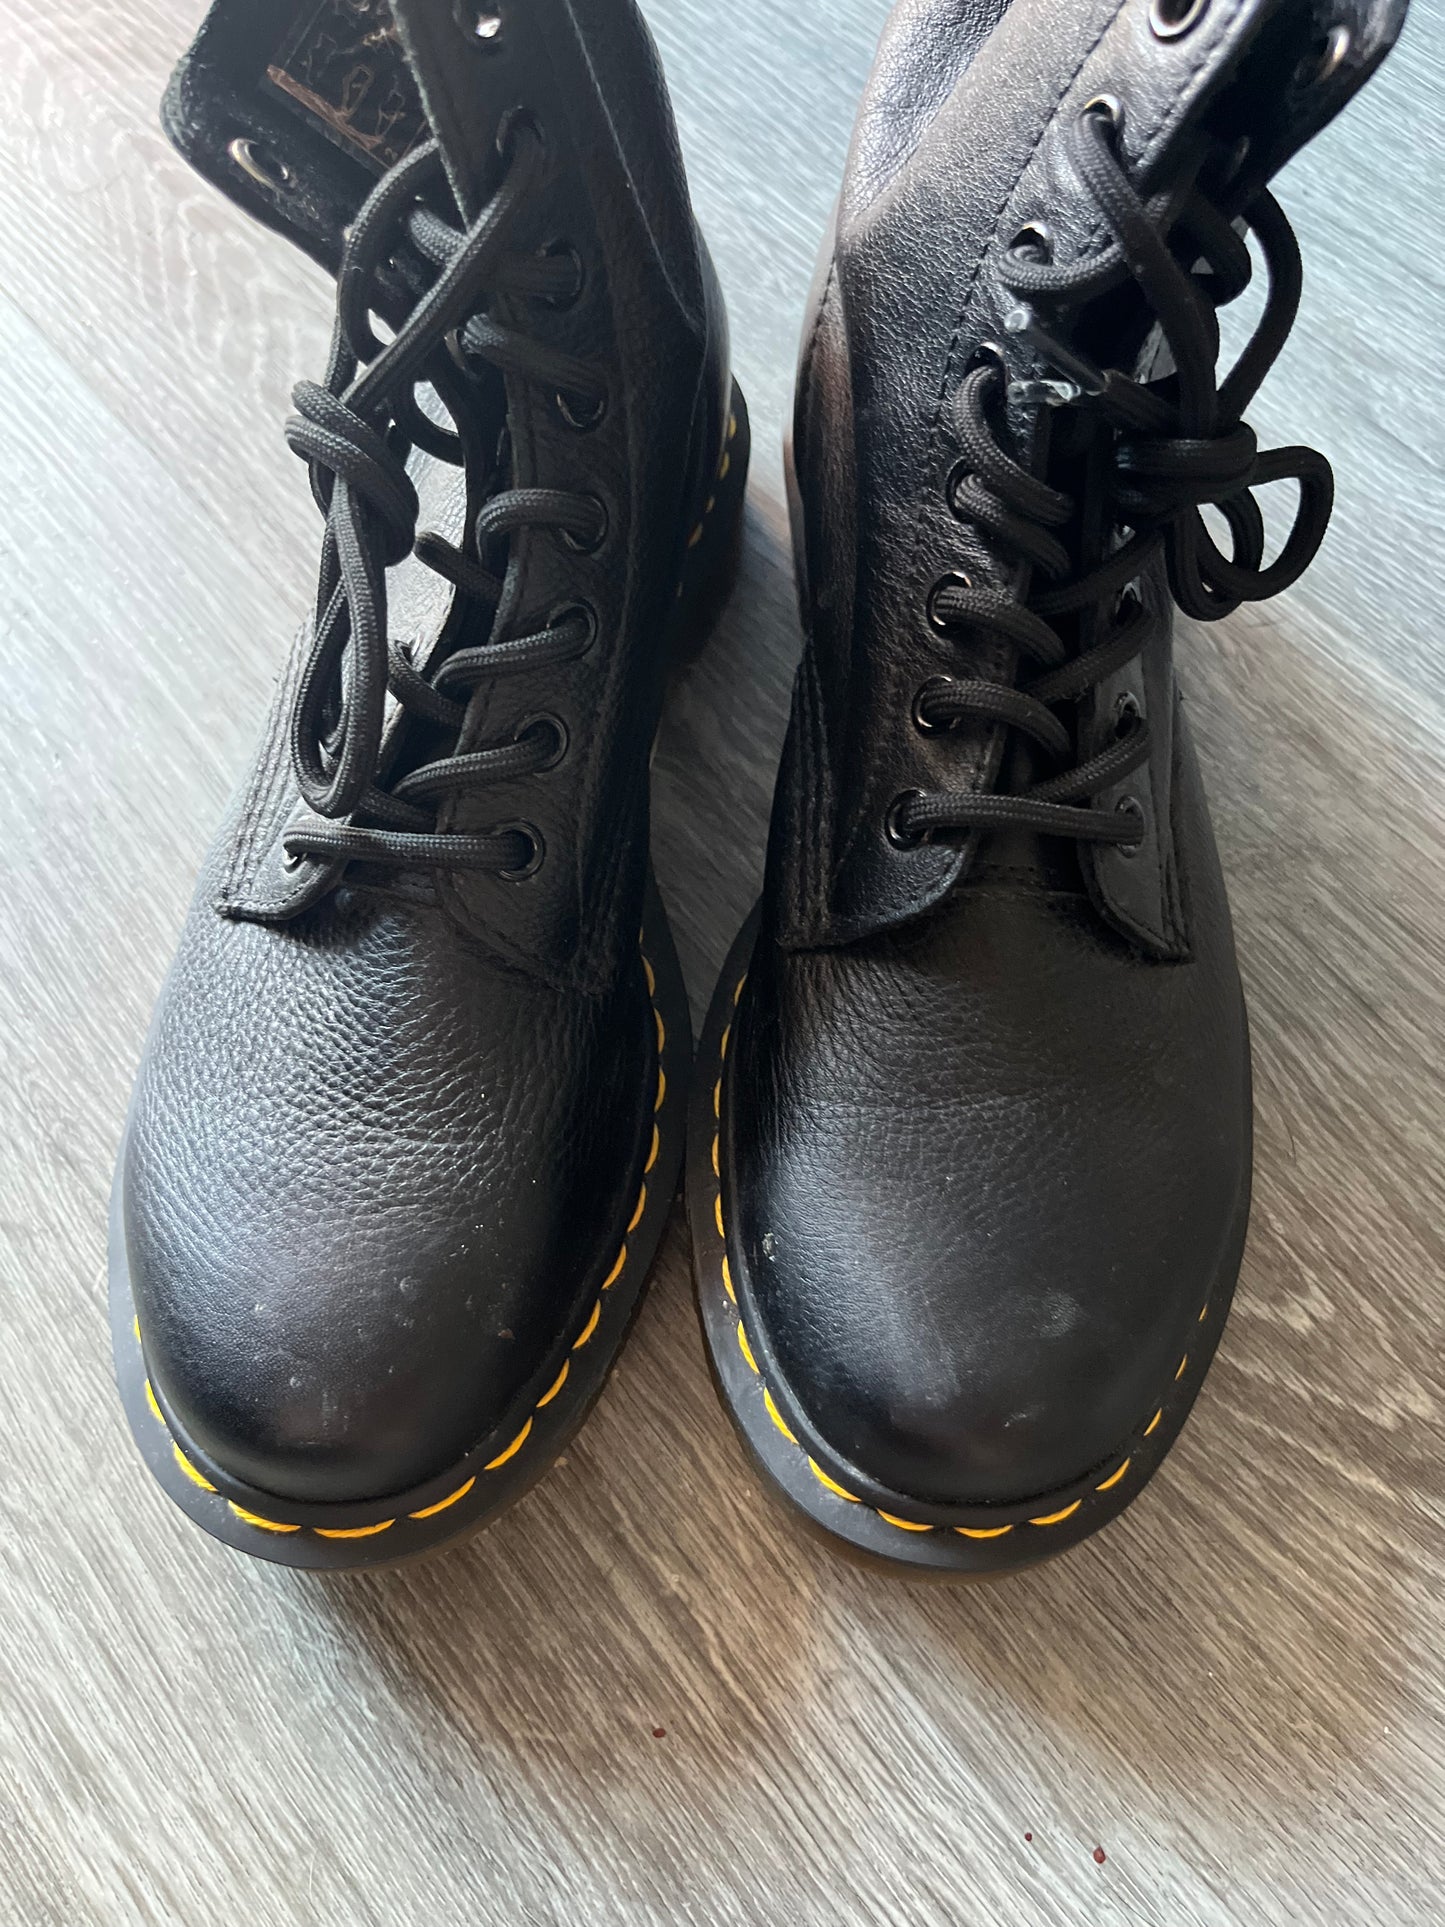 Modern Dr Marten 1460 Leather Boot / Size 8